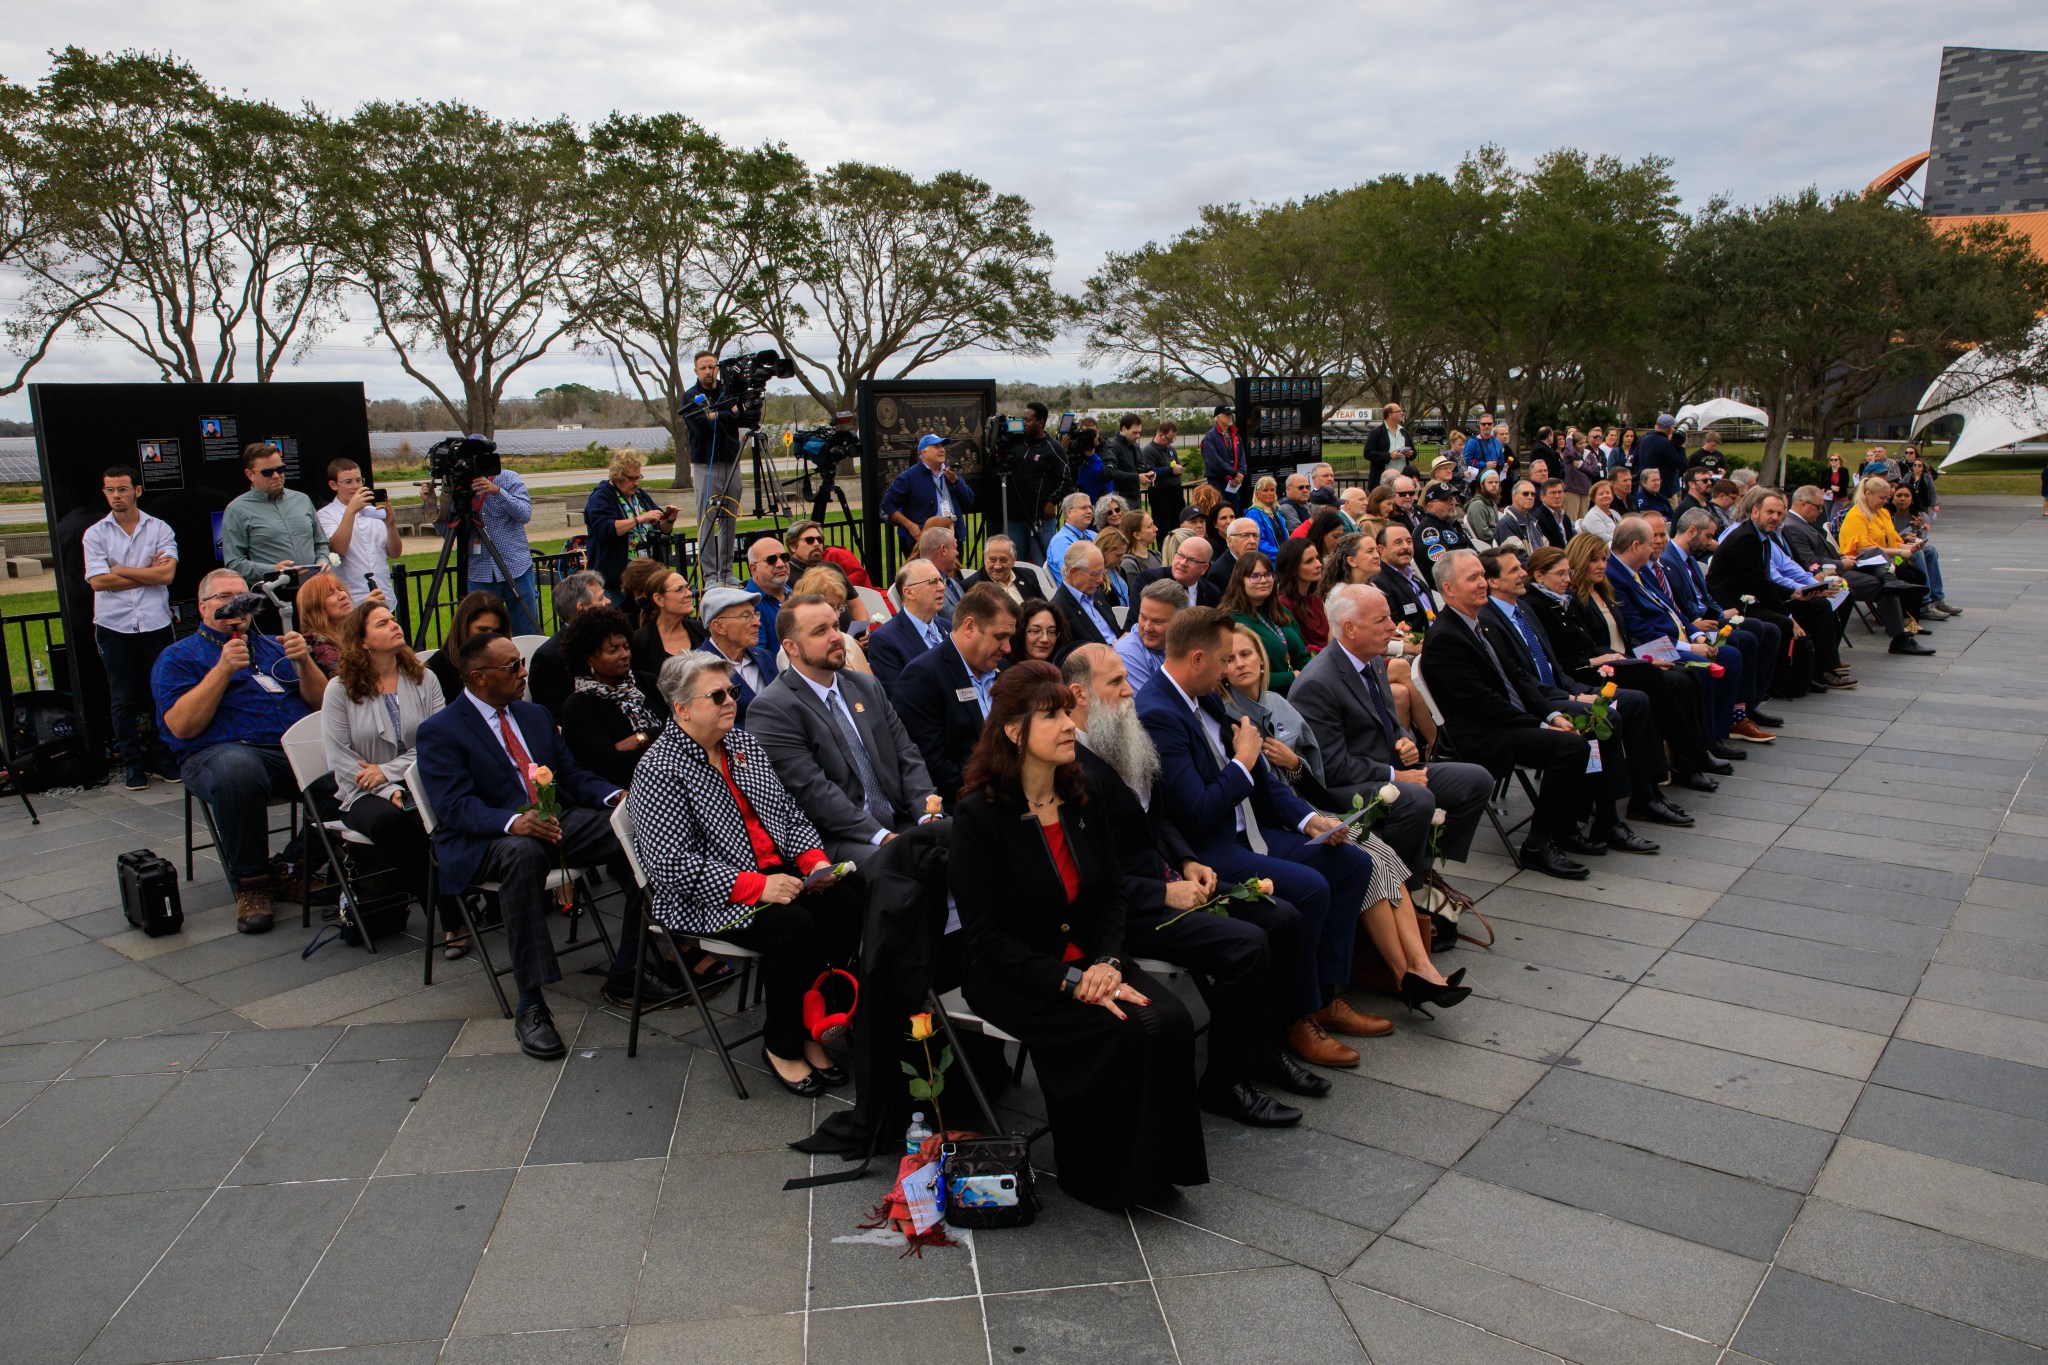 Kennedy Space Center workers and guests attend the Day of Remembrance at the Kennedy Space Center Visitor Complex in Florida on Jan. 26, 2023.